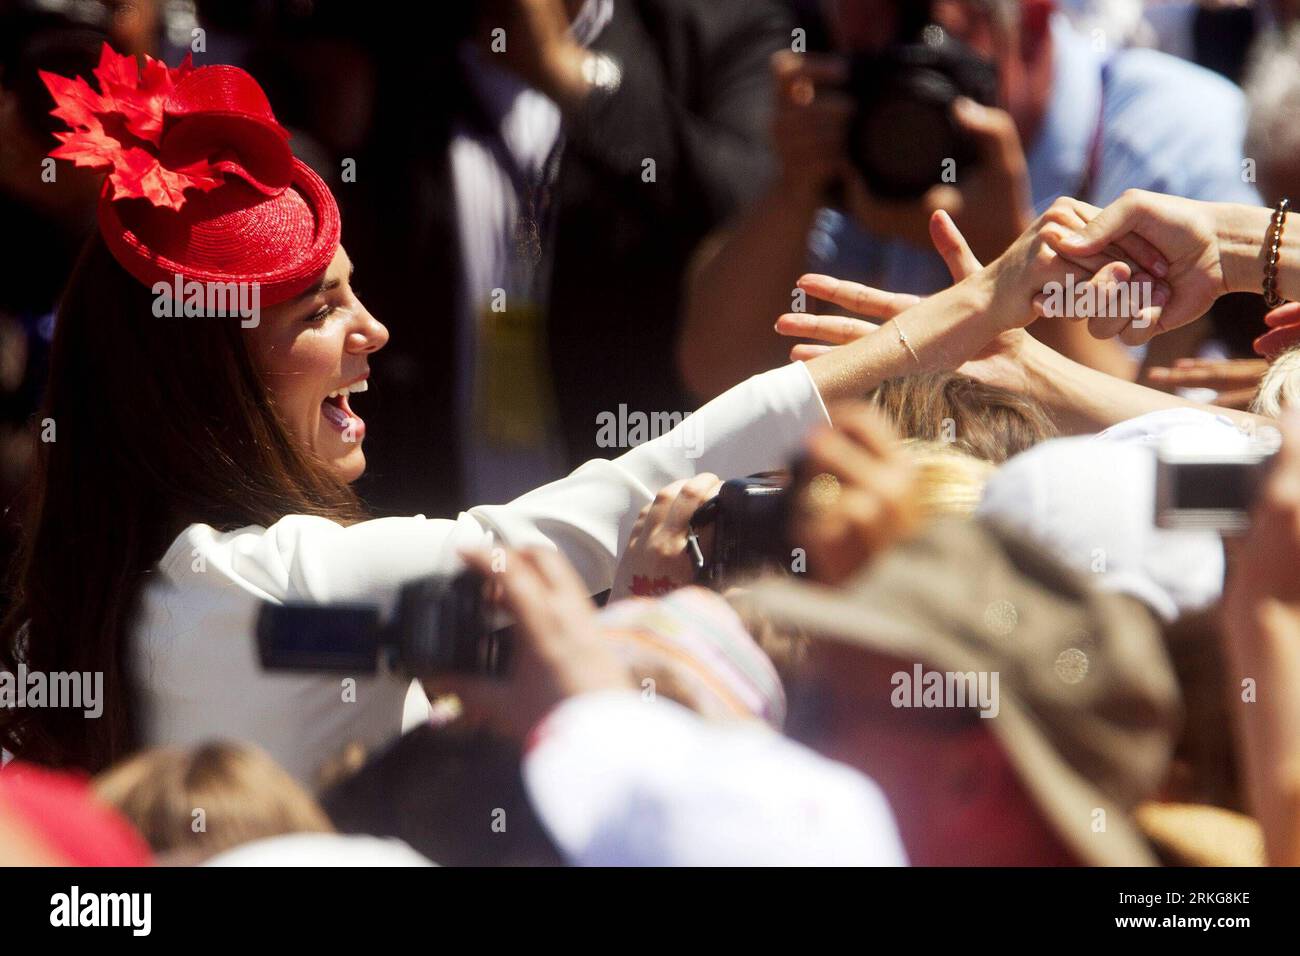 Bildnummer: 55565303  Datum: 01.07.2011  Copyright: imago/Xinhua (110702)-- OTTAWA, July 2, 2011 (Xinhua) -- Prince William s wife Kate, Britain s Duchess of Cambridge, shakes hands with during the 144th Canada Day celebrations on Parliament Hill in Ottawa, Canada, on July 1, 2011. The Royal couple is on a nine-day official visit to Canada, their first overseas trip since being married.(Xinhua/Christopher Pike)(zl) CANADA-CANADA DAY-CELEBRATION PUBLICATIONxNOTxINxCHN People Entertainment Adel GBR Königshaus Kate xda x0x premiumd Middleton 2011 quer  Catherine    Bildnummer 55565303 Date 01 07 Stock Photo